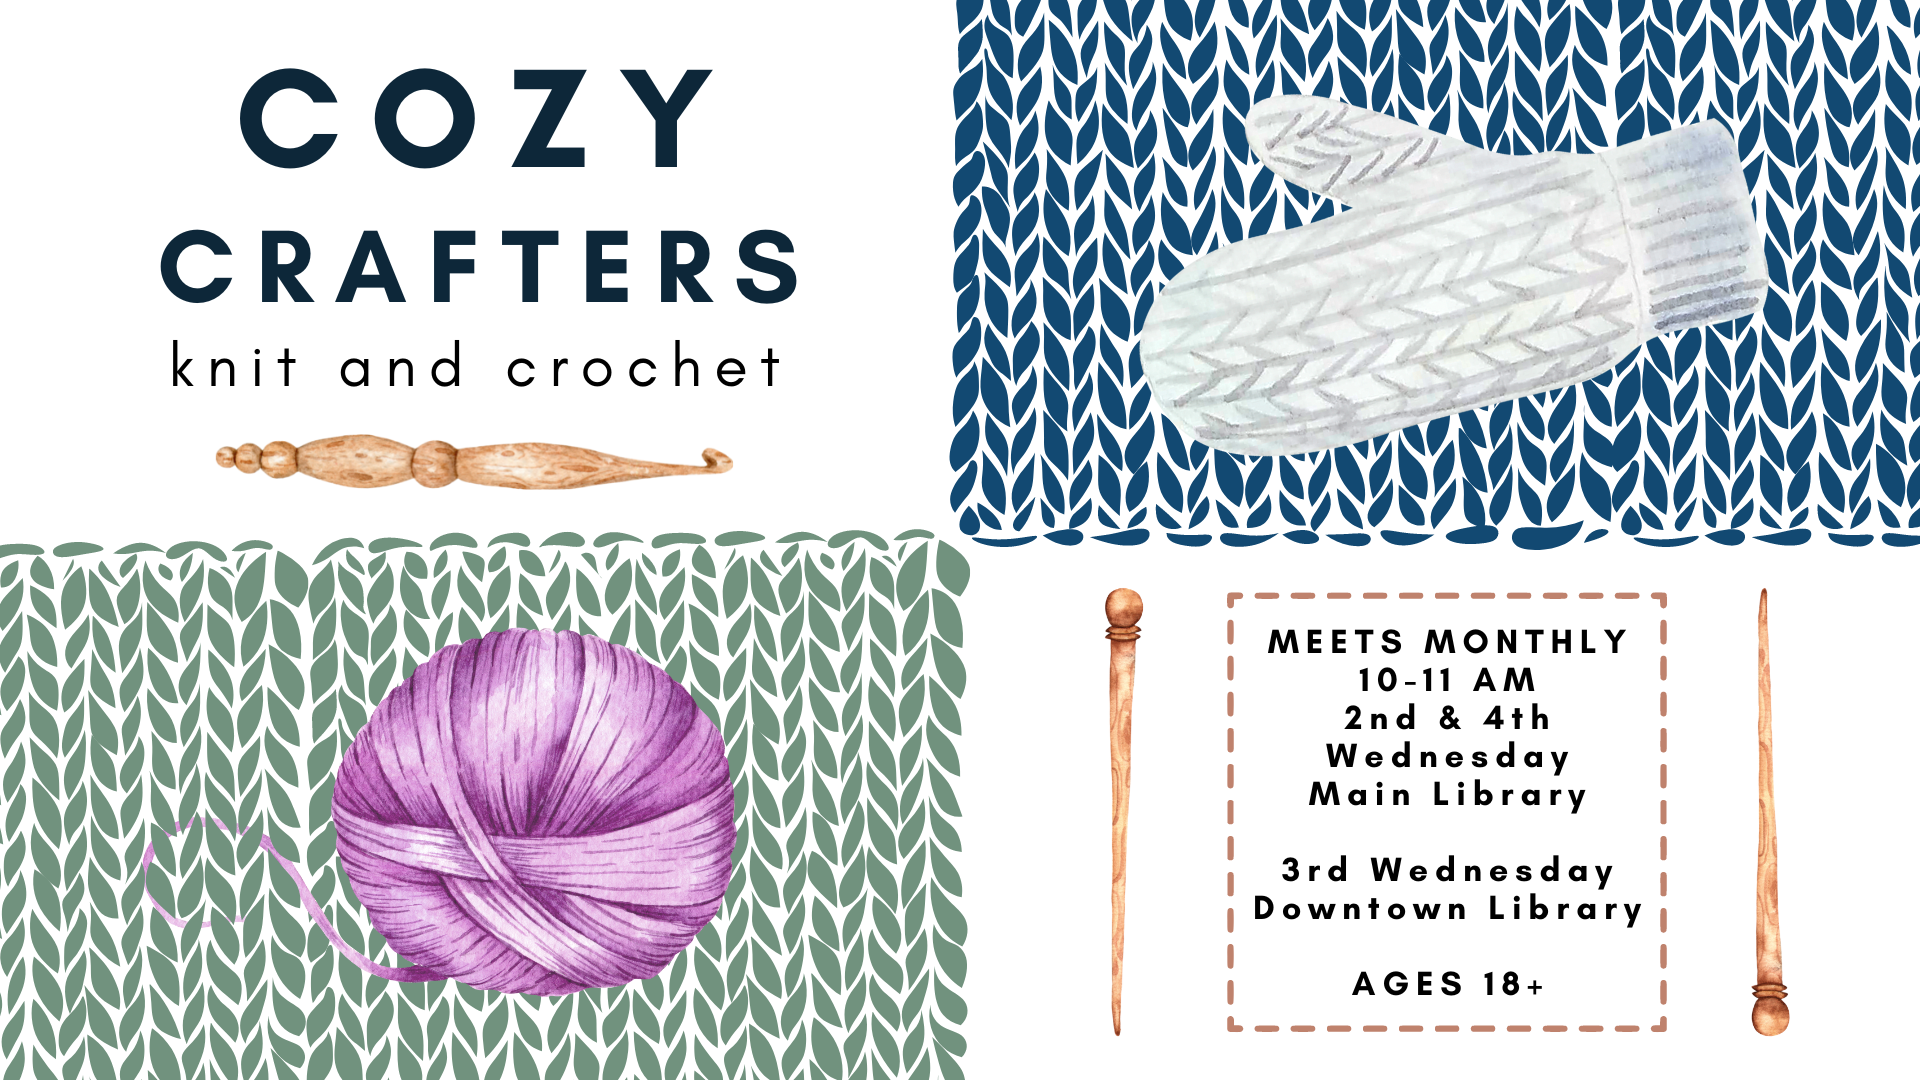 cozy crafters knit and crochet; meets monthly, 10-11 am, 2nd and 4th wednesday at the main library; ages 18+